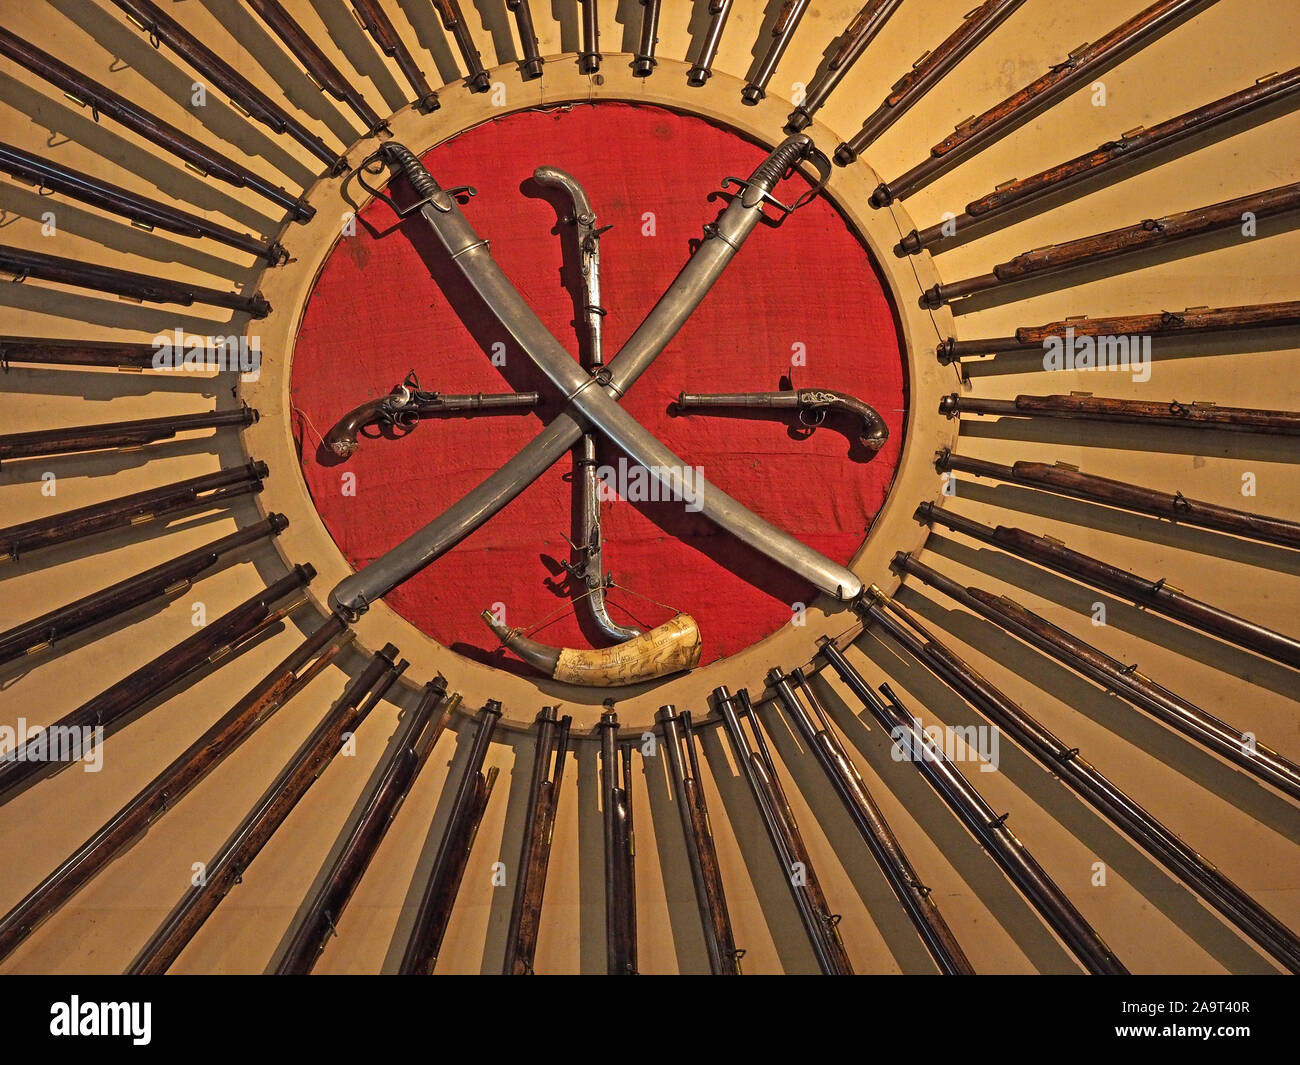 wheel of many rifle barrels surround a red circle with crossed sheathed swords & ancient pistols with powder horn create radial pattern  England, UK Stock Photo